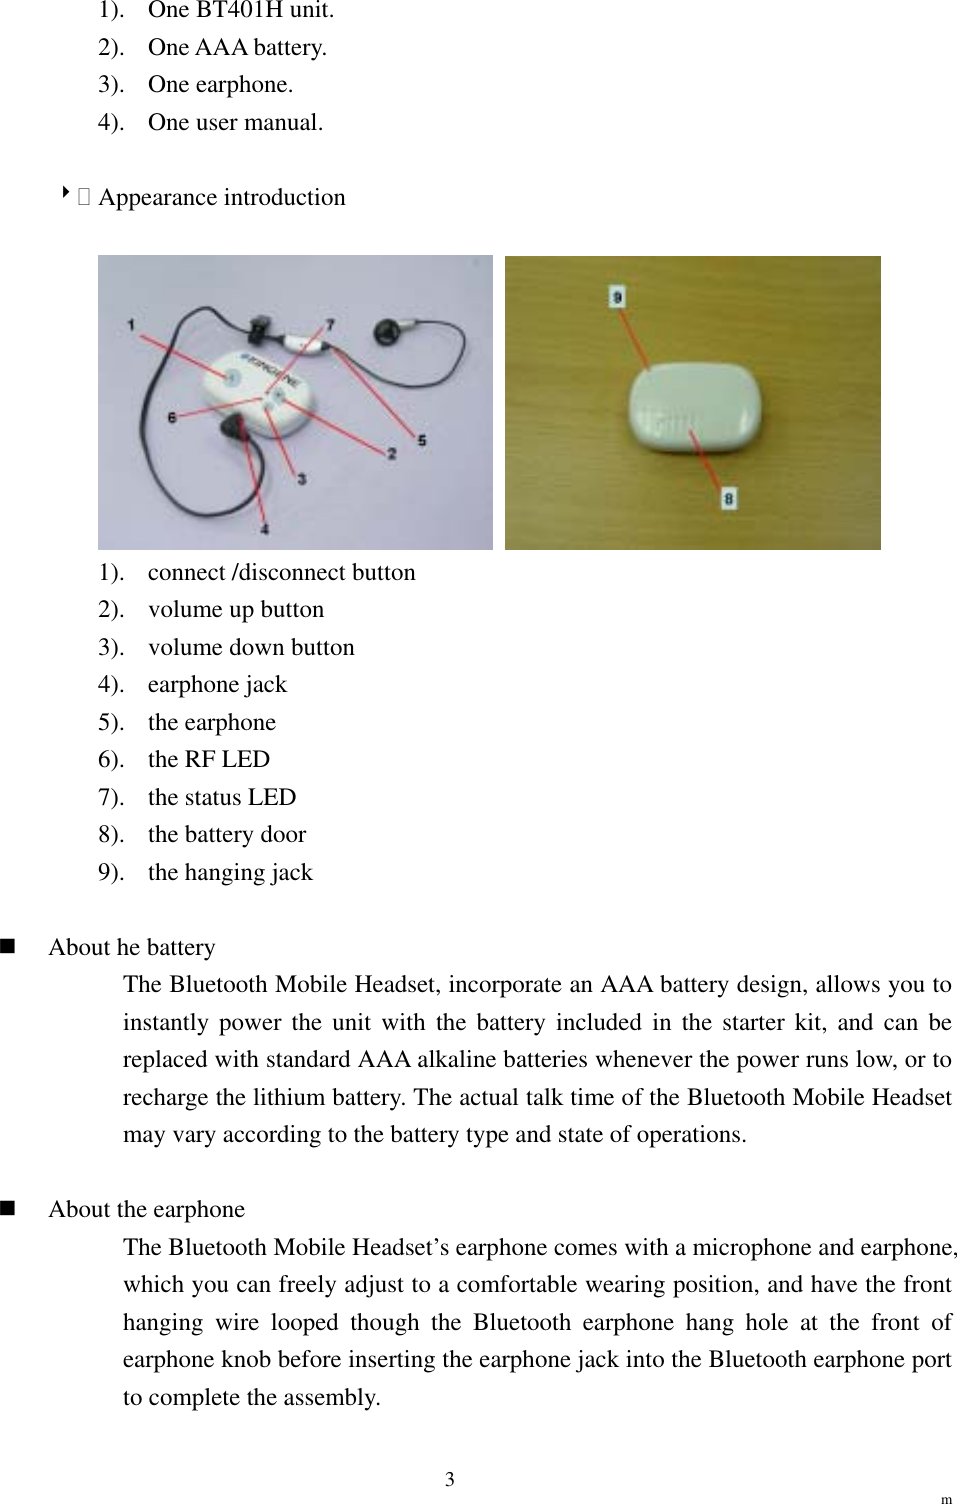                                                                  m 31).  One BT401H unit. 2). One AAA battery. 3). One earphone. 4).  One user manual.  8 Appearance introduction    1). connect /disconnect button 2).  volume up button 3).  volume down button 4). earphone jack 5). the earphone 6).  the RF LED 7).  the status LED 8).  the battery door 9). the hanging jack    About he battery The Bluetooth Mobile Headset, incorporate an AAA battery design, allows you to instantly power the unit with the battery included in the starter kit, and can be replaced with standard AAA alkaline batteries whenever the power runs low, or to recharge the lithium battery. The actual talk time of the Bluetooth Mobile Headset may vary according to the battery type and state of operations.    About the earphone The Bluetooth Mobile Headset’s earphone comes with a microphone and earphone, which you can freely adjust to a comfortable wearing position, and have the front hanging wire looped though the Bluetooth earphone hang hole at the front of earphone knob before inserting the earphone jack into the Bluetooth earphone port to complete the assembly. 